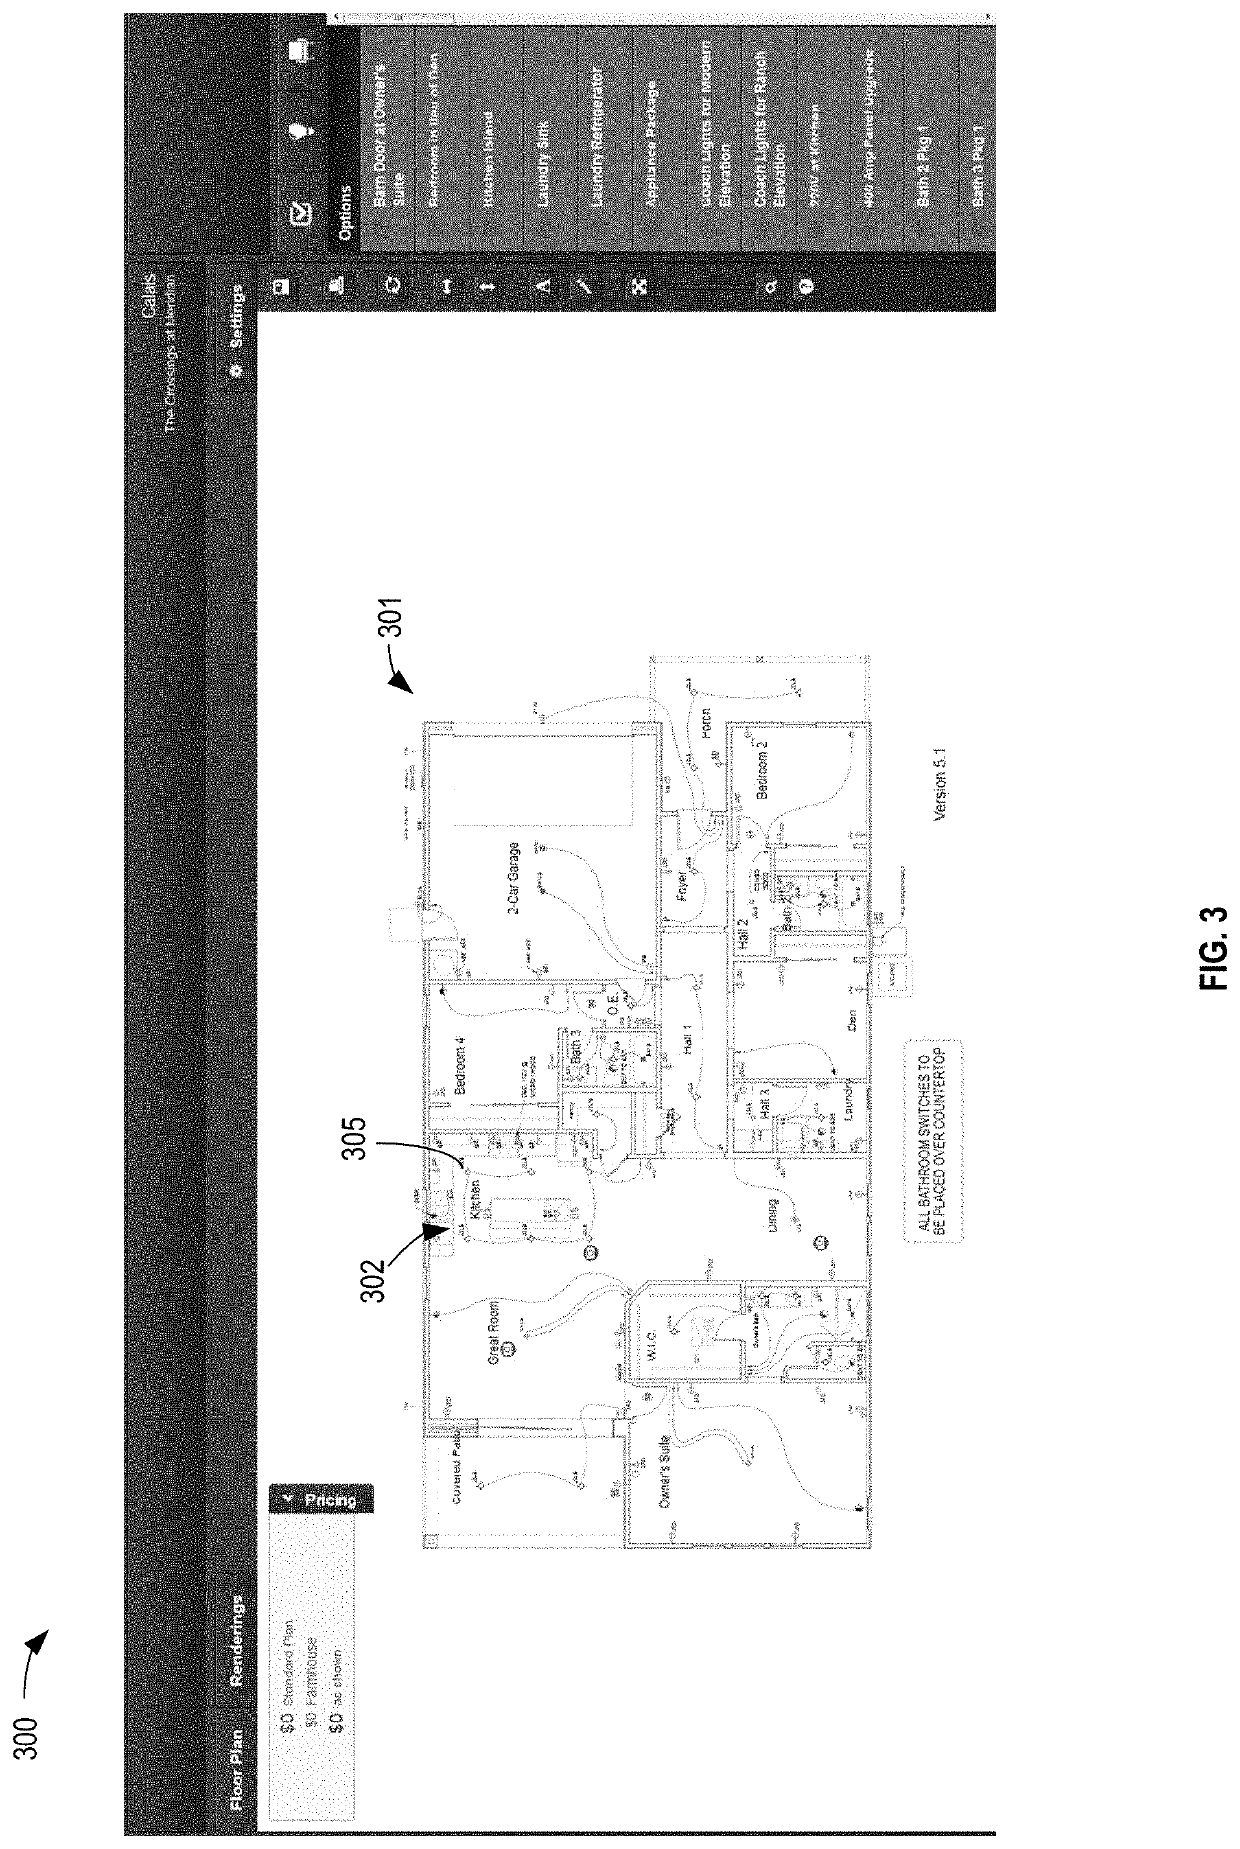 Systems and Methods for Implementing an Interactive Virtual Design Tool